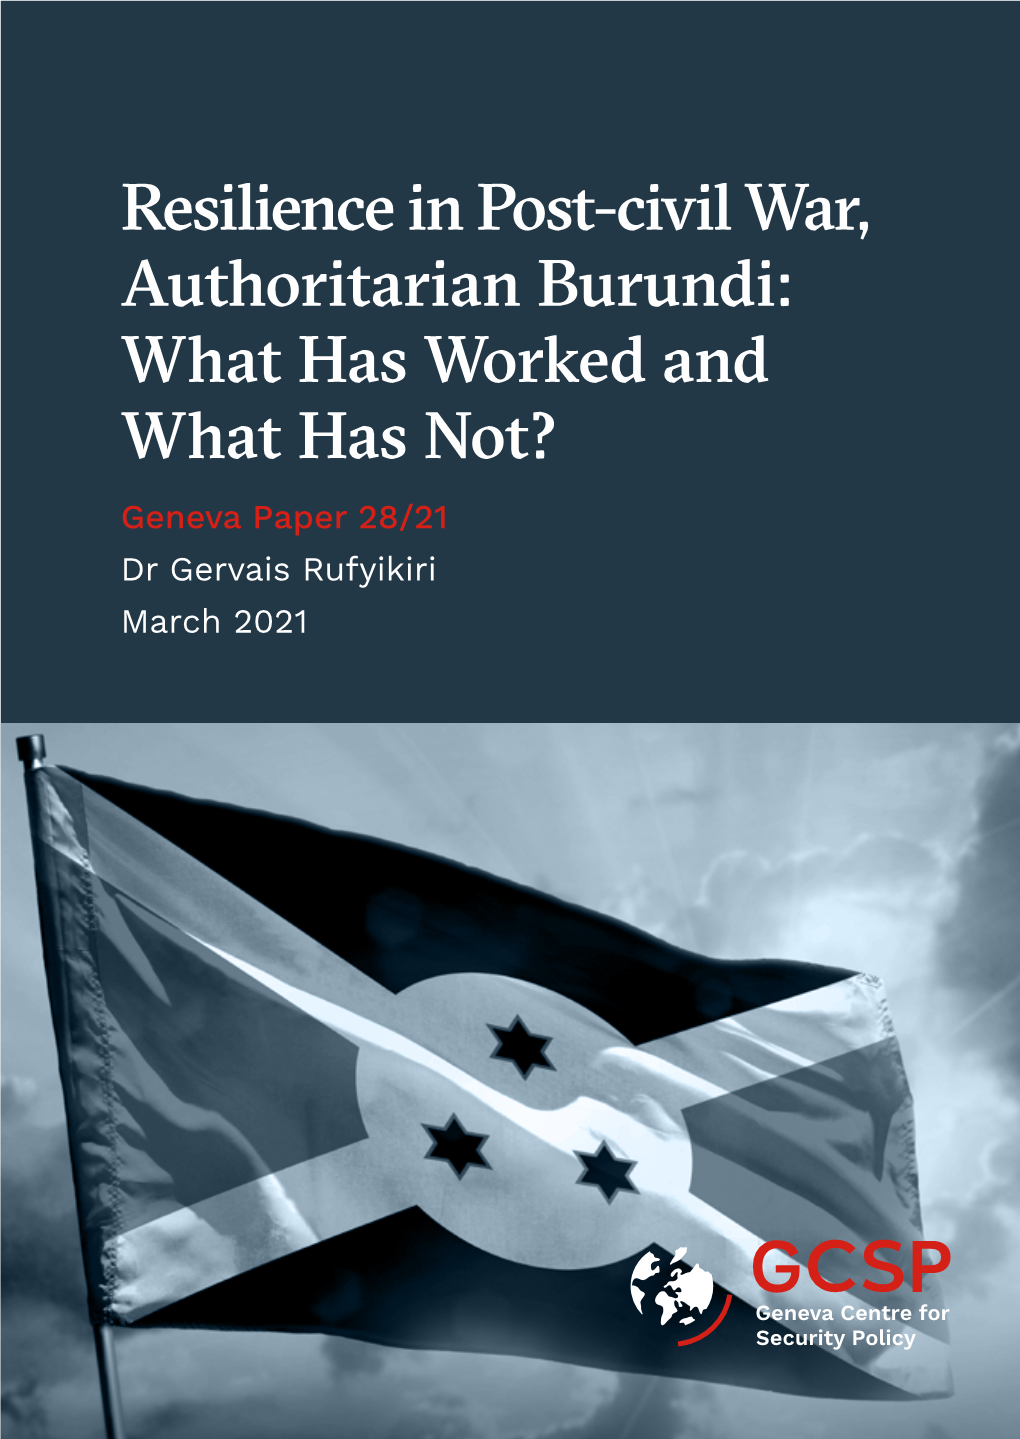 Resilience in Post-Civil War, Authoritarian Burundi: What Has Worked and What Has Not? Geneva Paper 28/21 Dr Gervais Rufyikiri March 2021